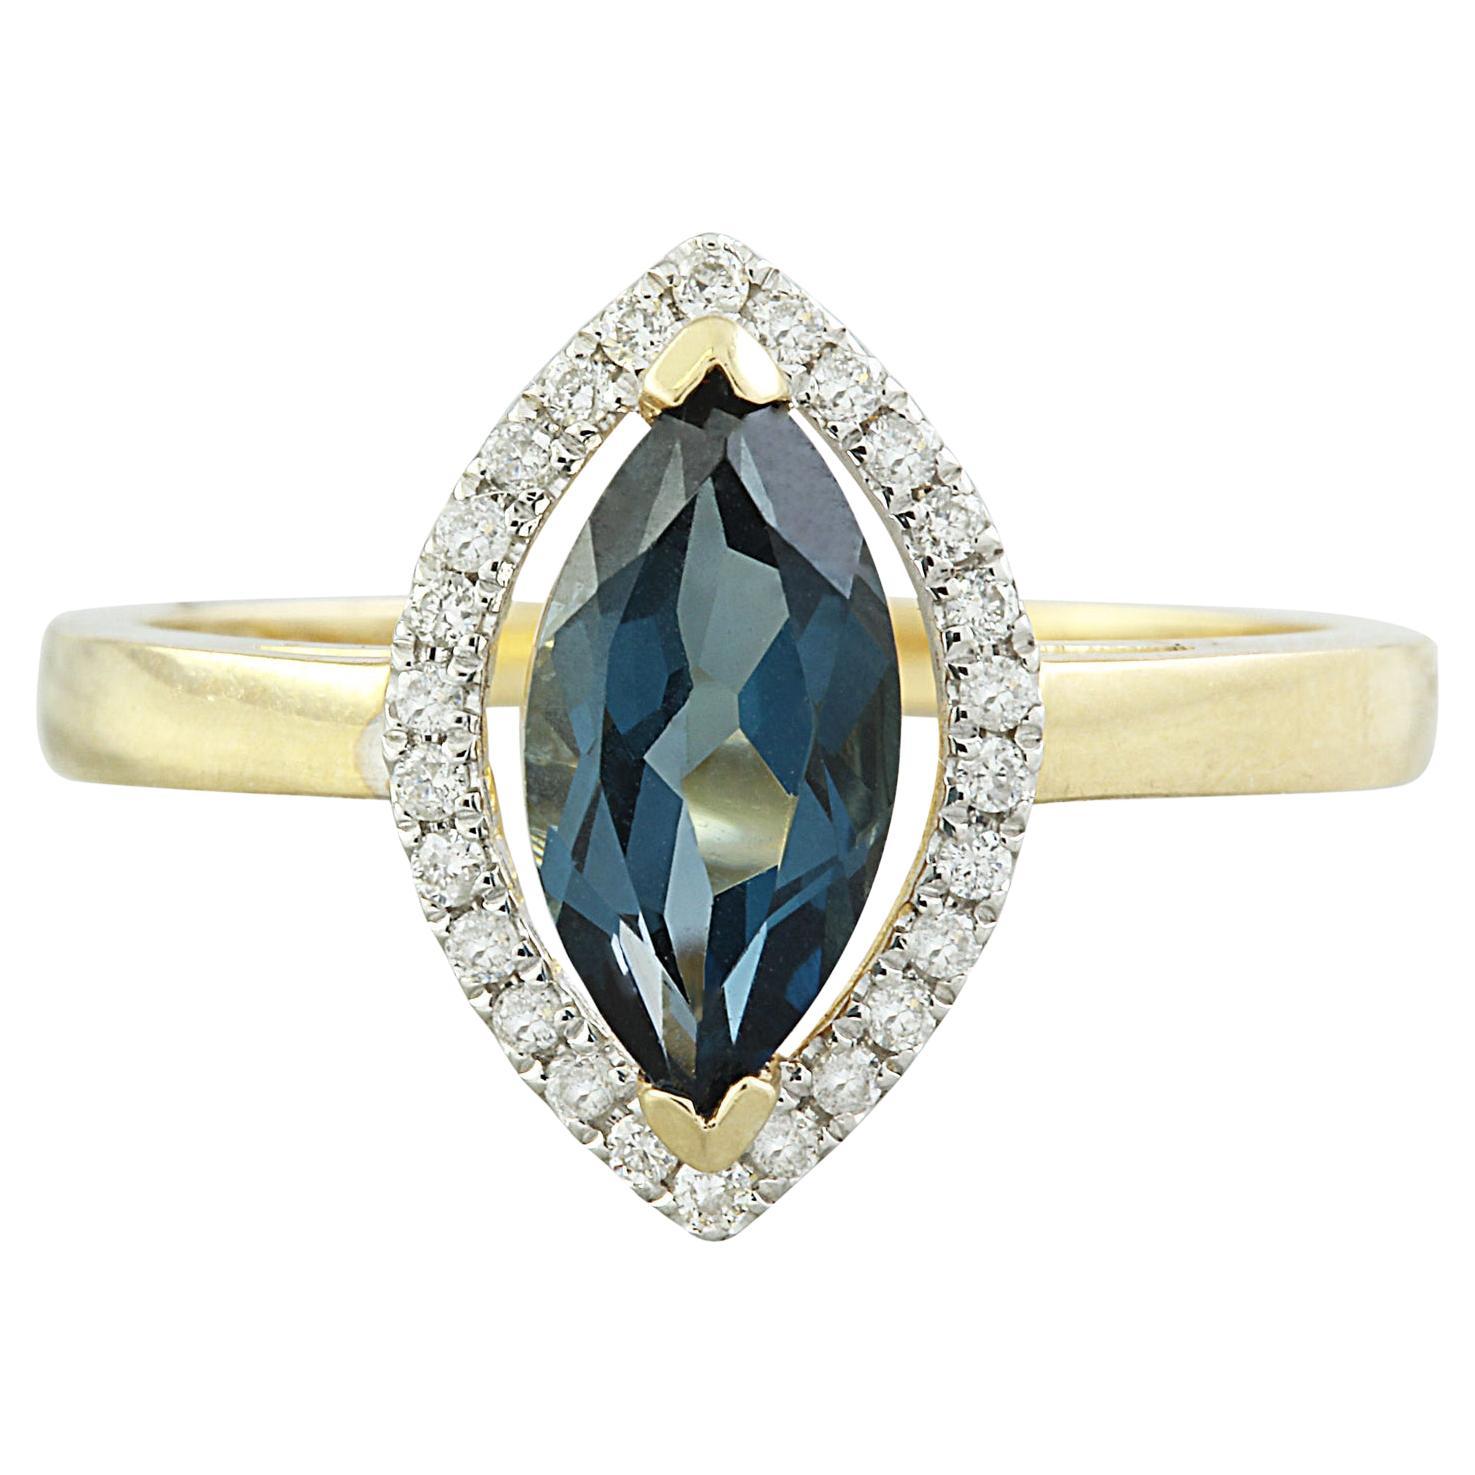 Natural Blue Topaz Diamond Ring in 14K Solid Yellow Gold